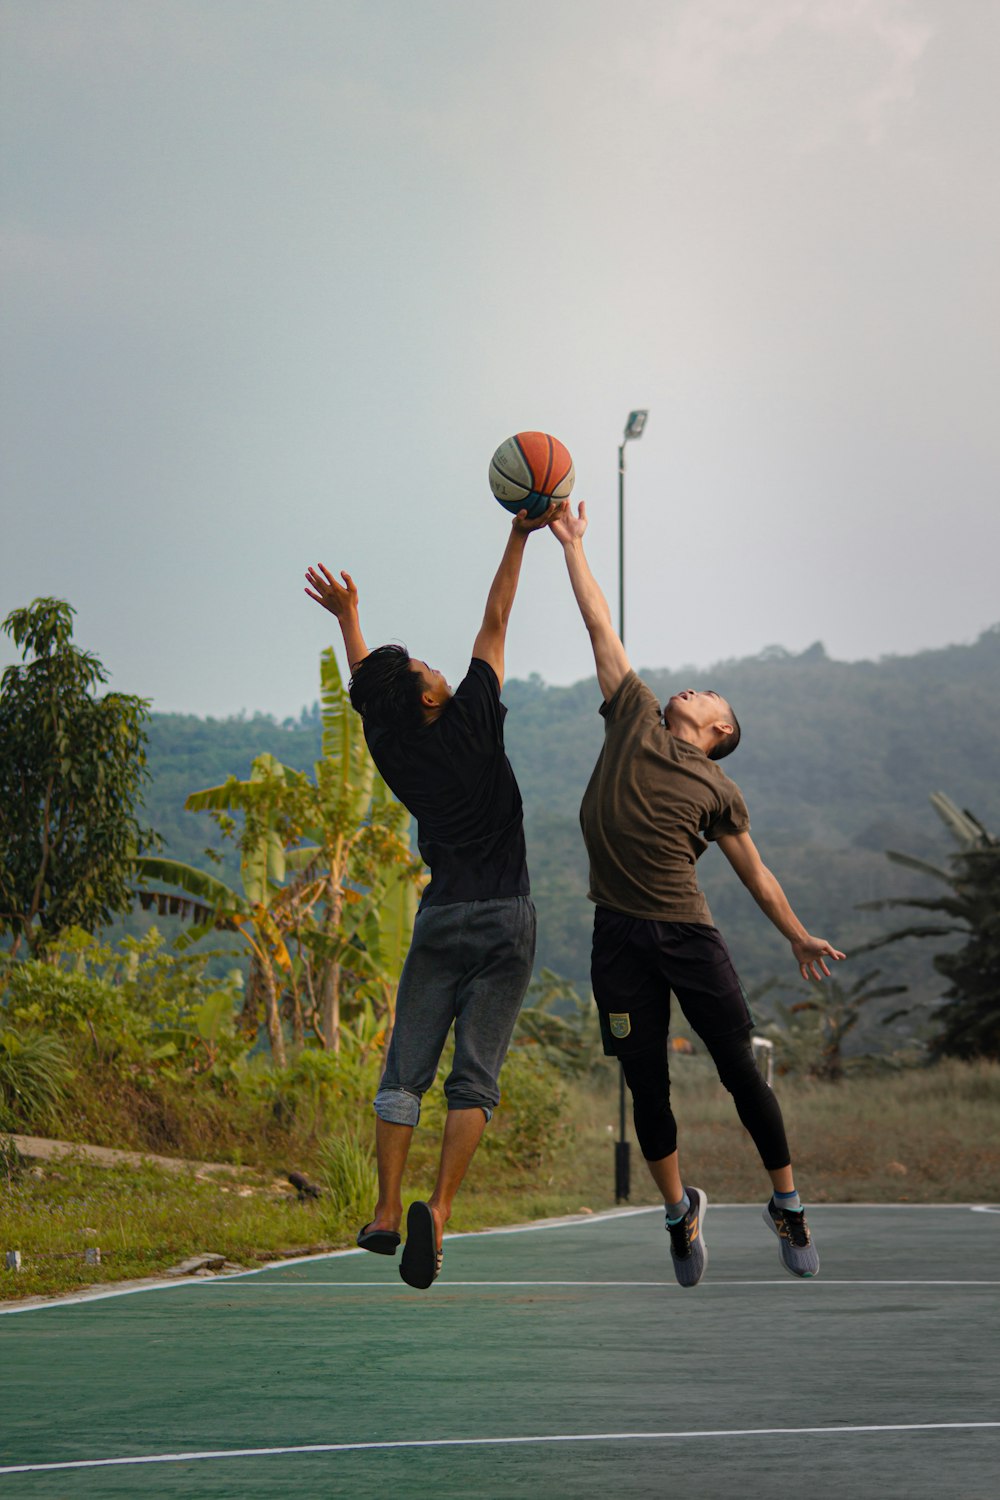 two young men playing basketball on a basketball court